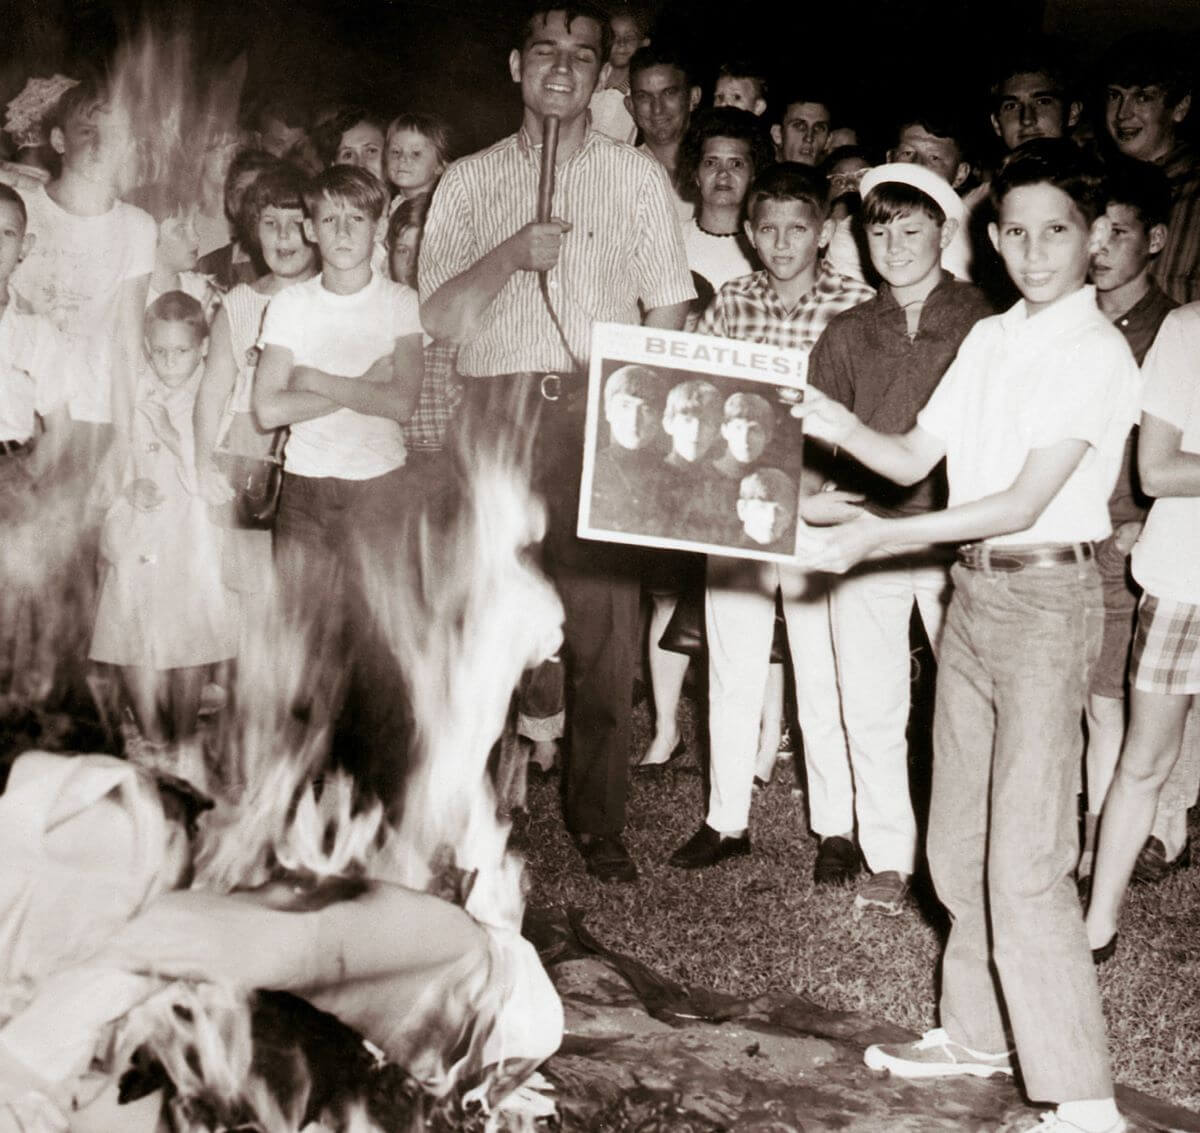 A black and white picture of a teenage boy holding a Beatles record up to the crowd in front of a fire.